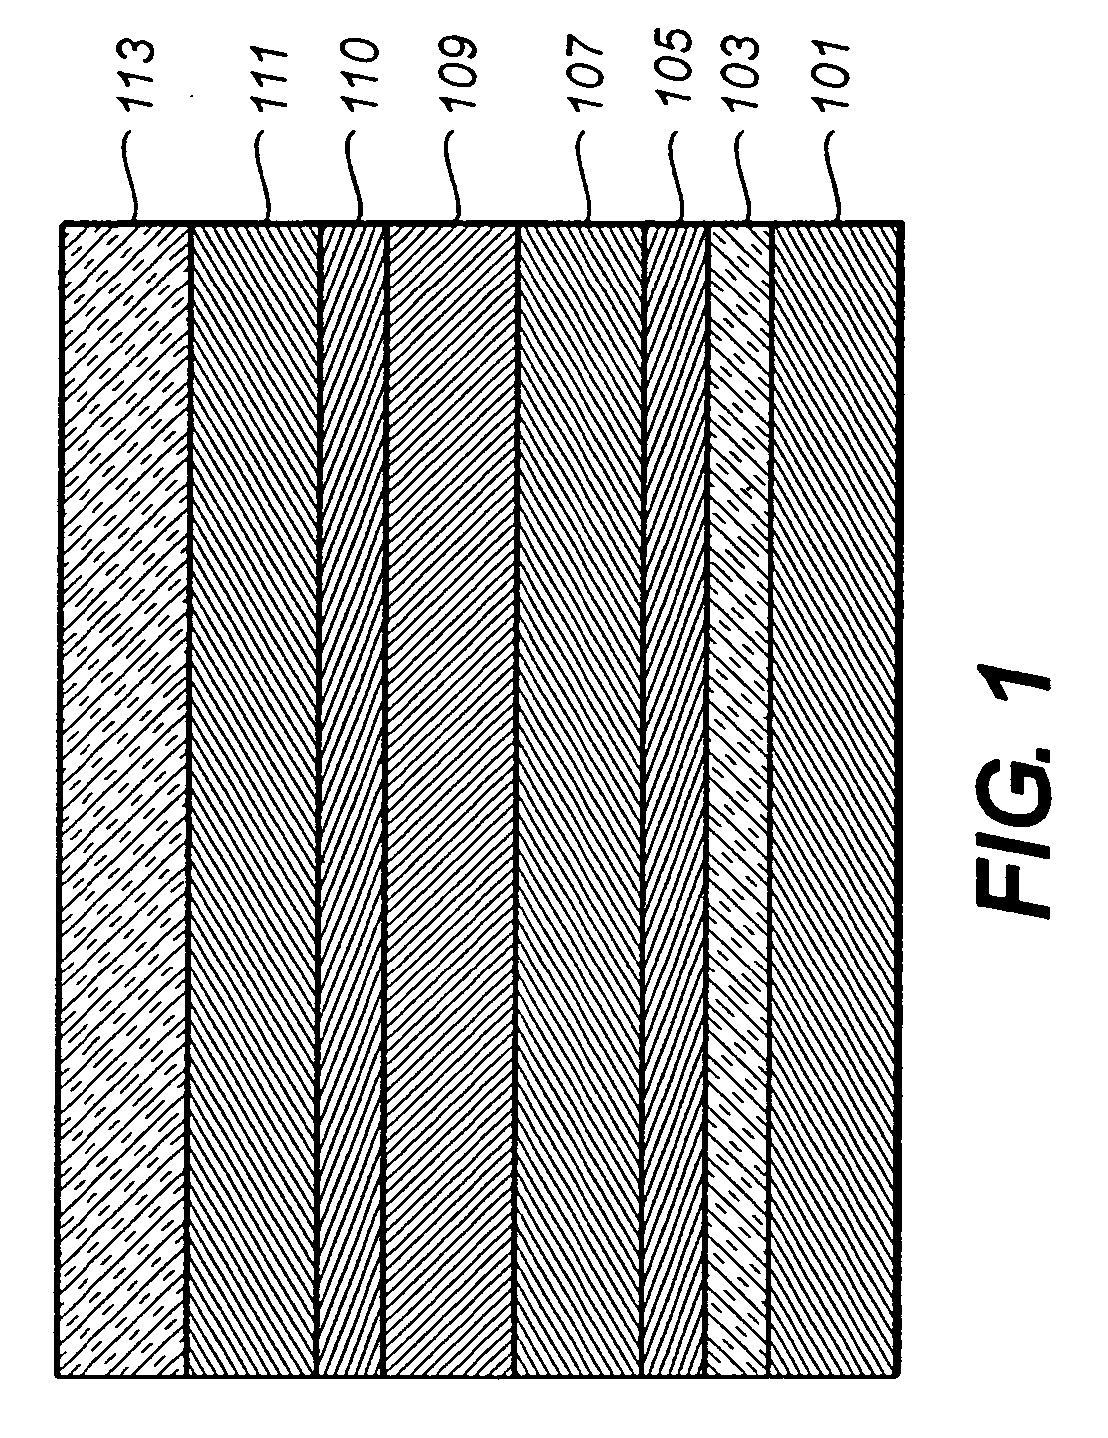 Organic electroluminescent devices and composition